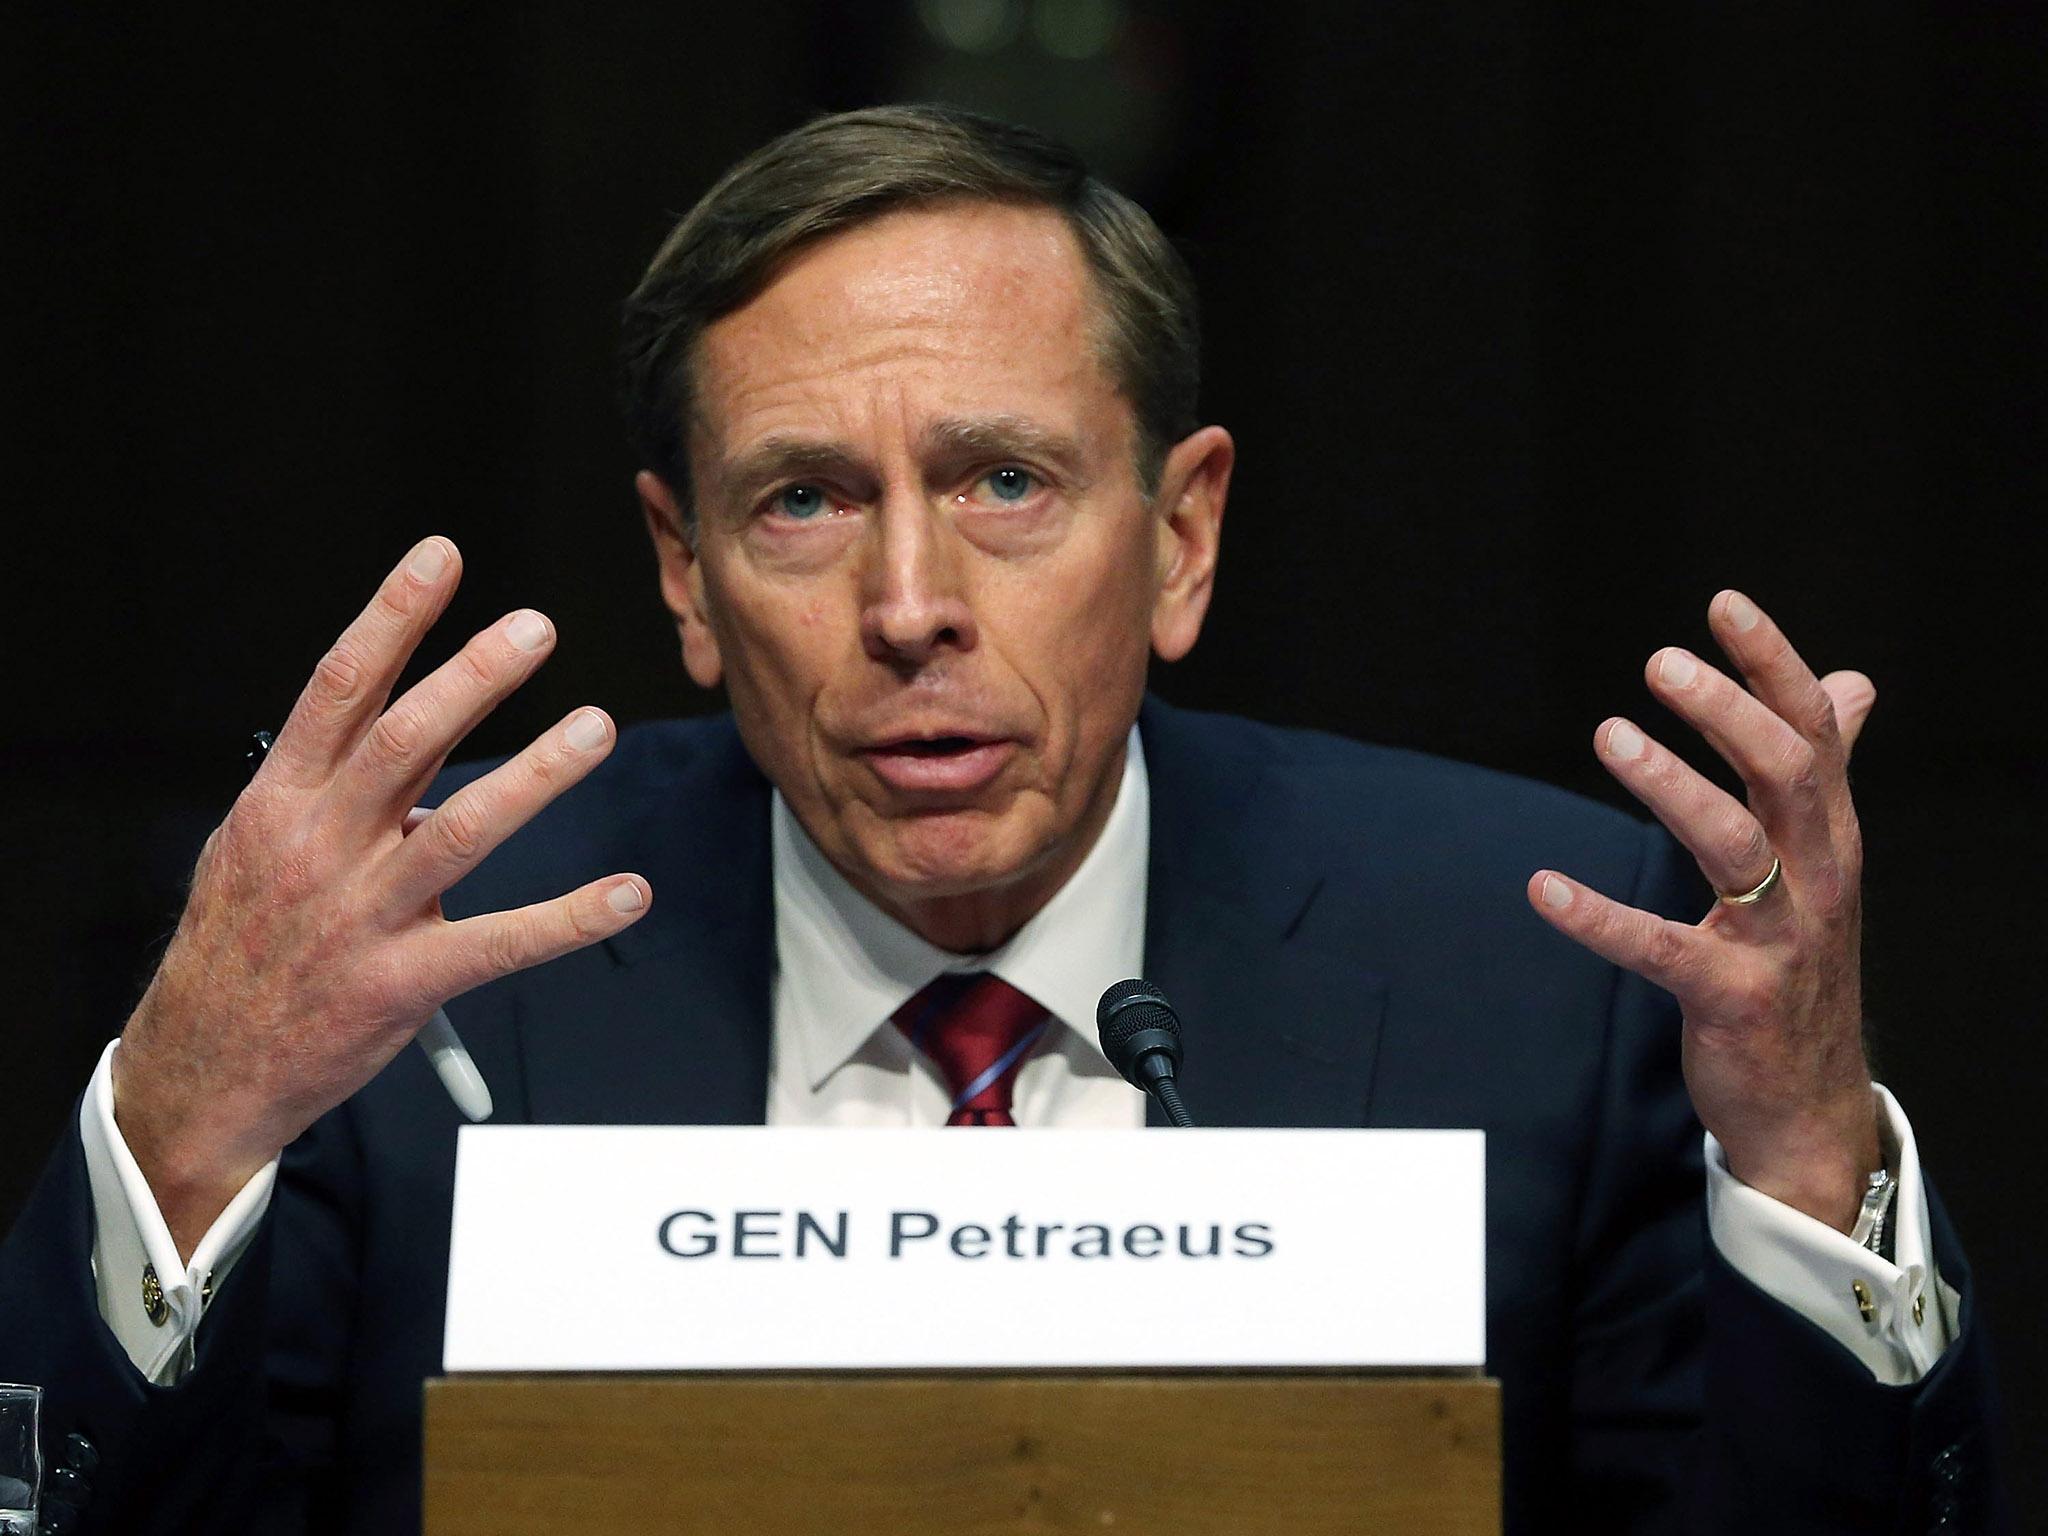 General David Petraeus was considered by Trump for the role of Secretary of State